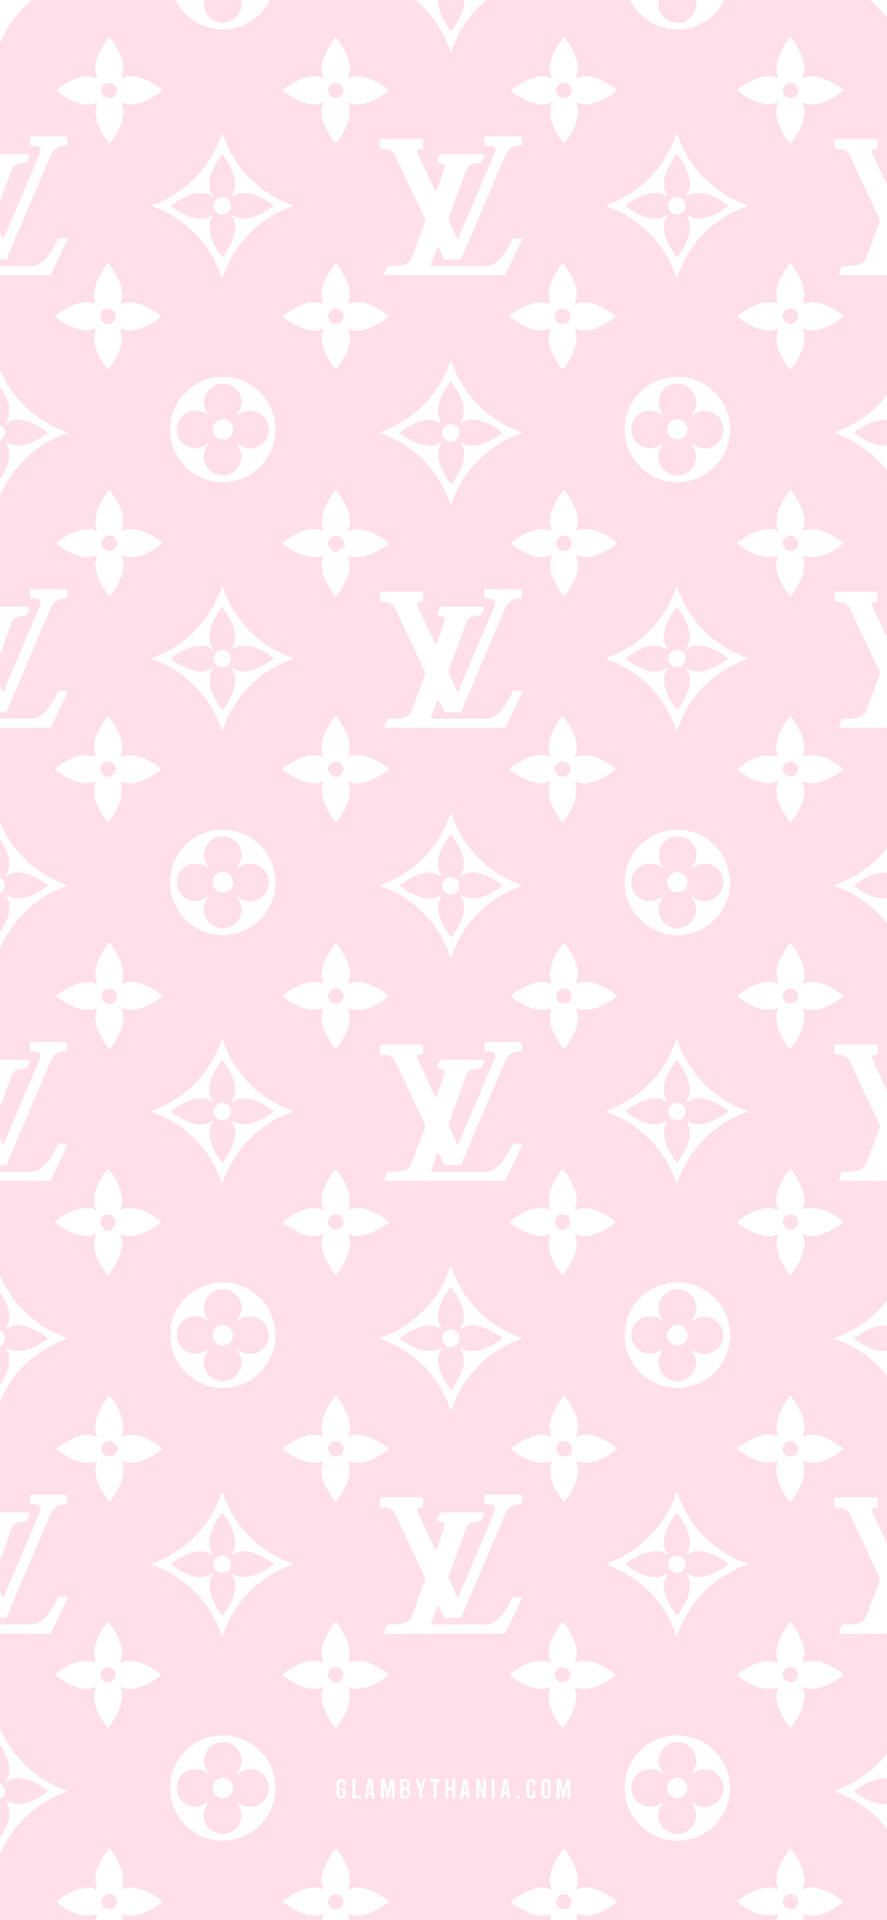 Louis Vuitton Girly Iphone